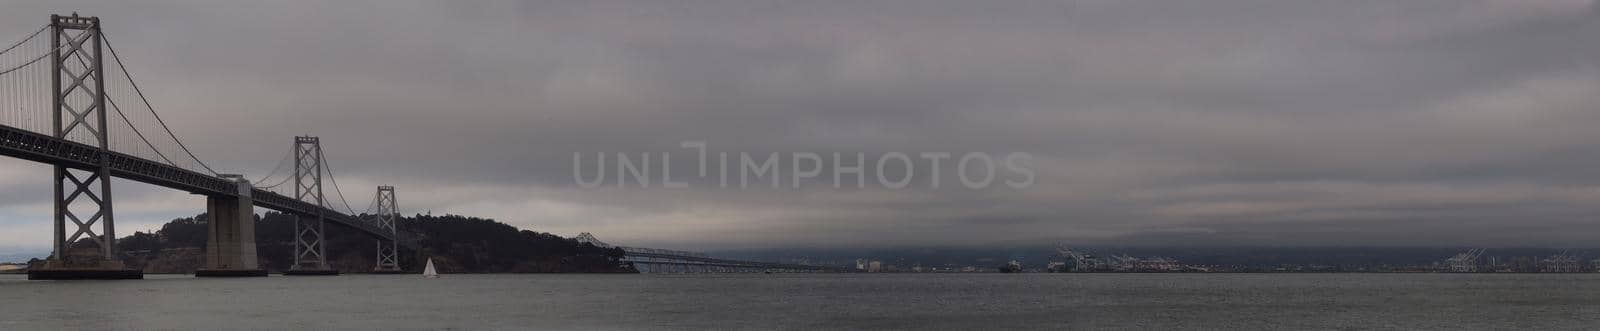 Panoramic of Boat sail by the San Francisco Bay Bridge on a foggy day by EricGBVD